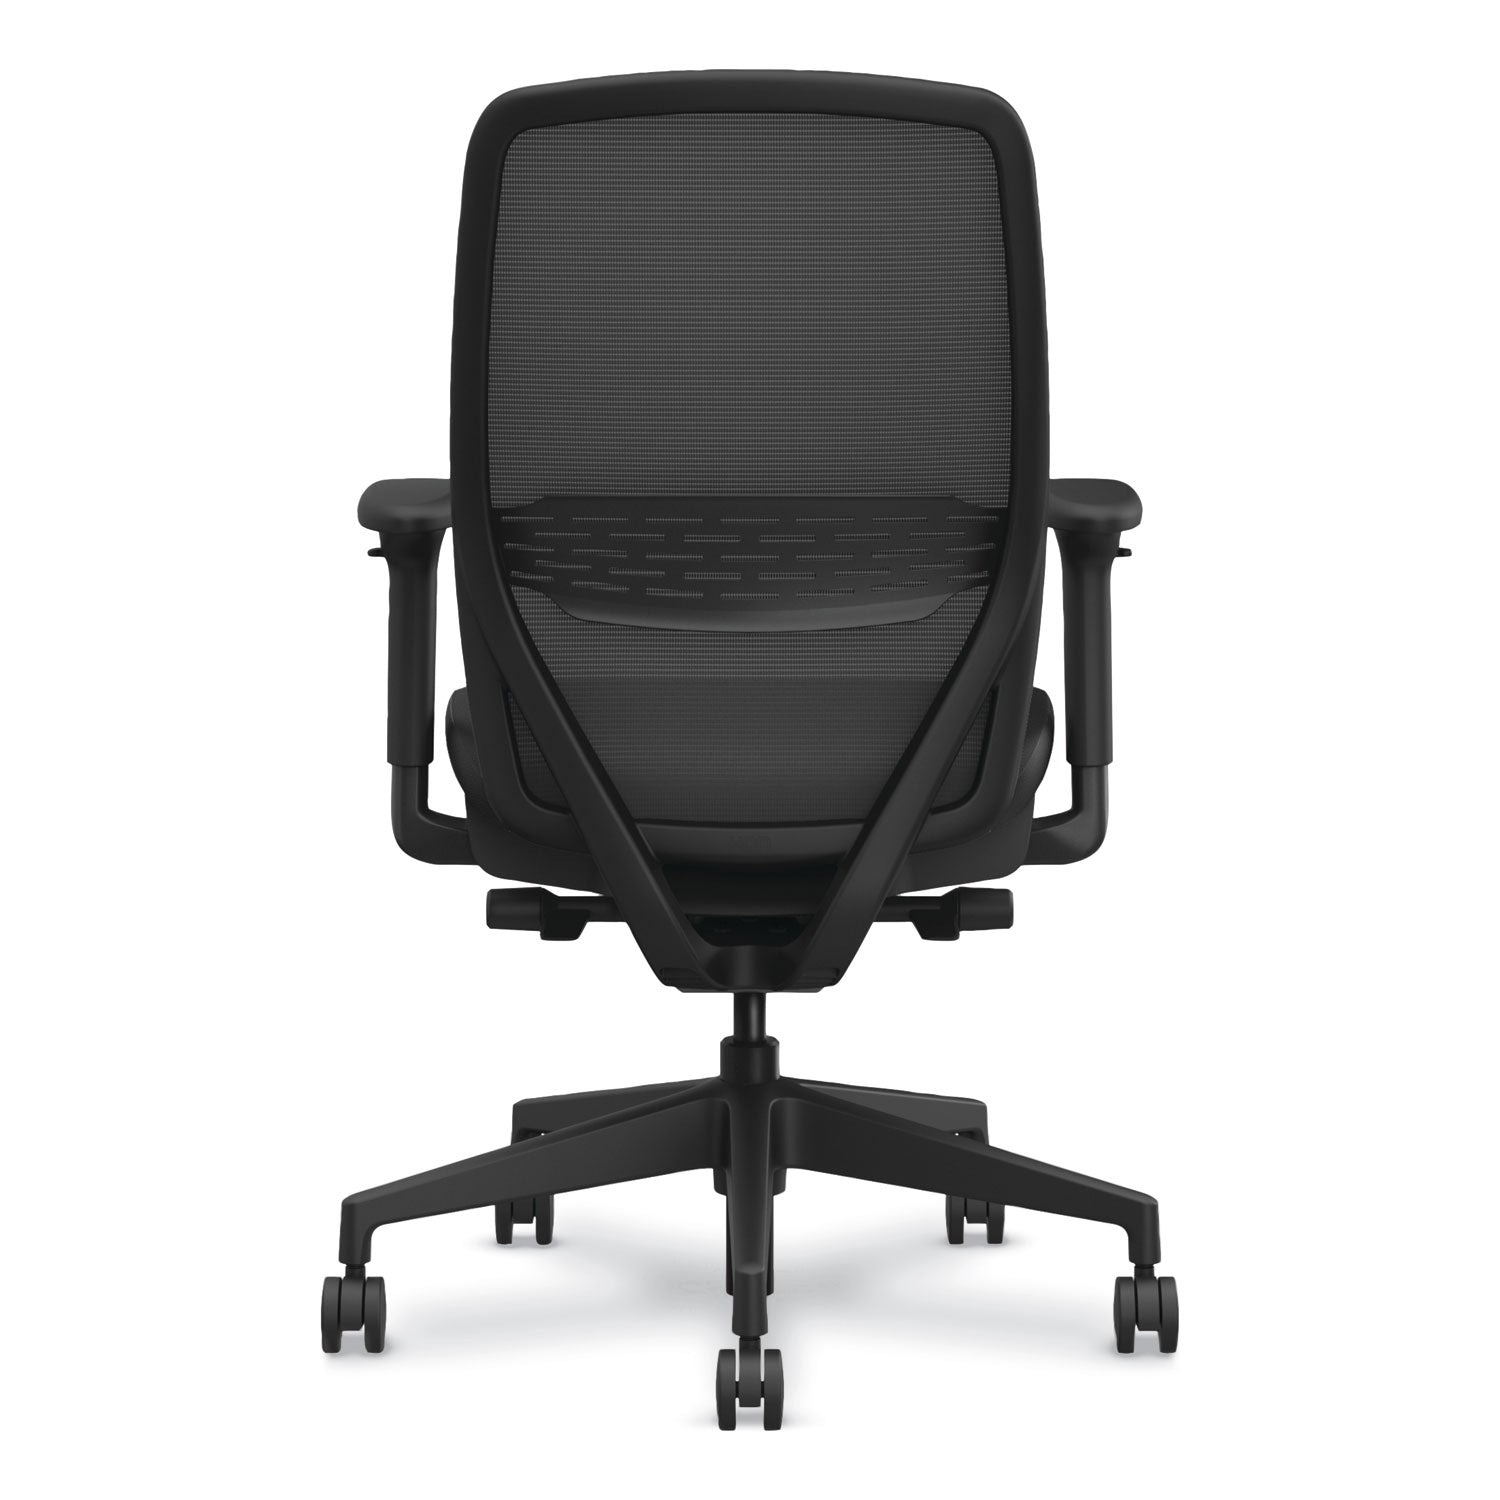 nucleus-series-recharge-task-chair-supports-up-to-300-lb-1663-to-2113-seat-height-black-ships-in-7-10-business-days_honnr12samu10bt - 3